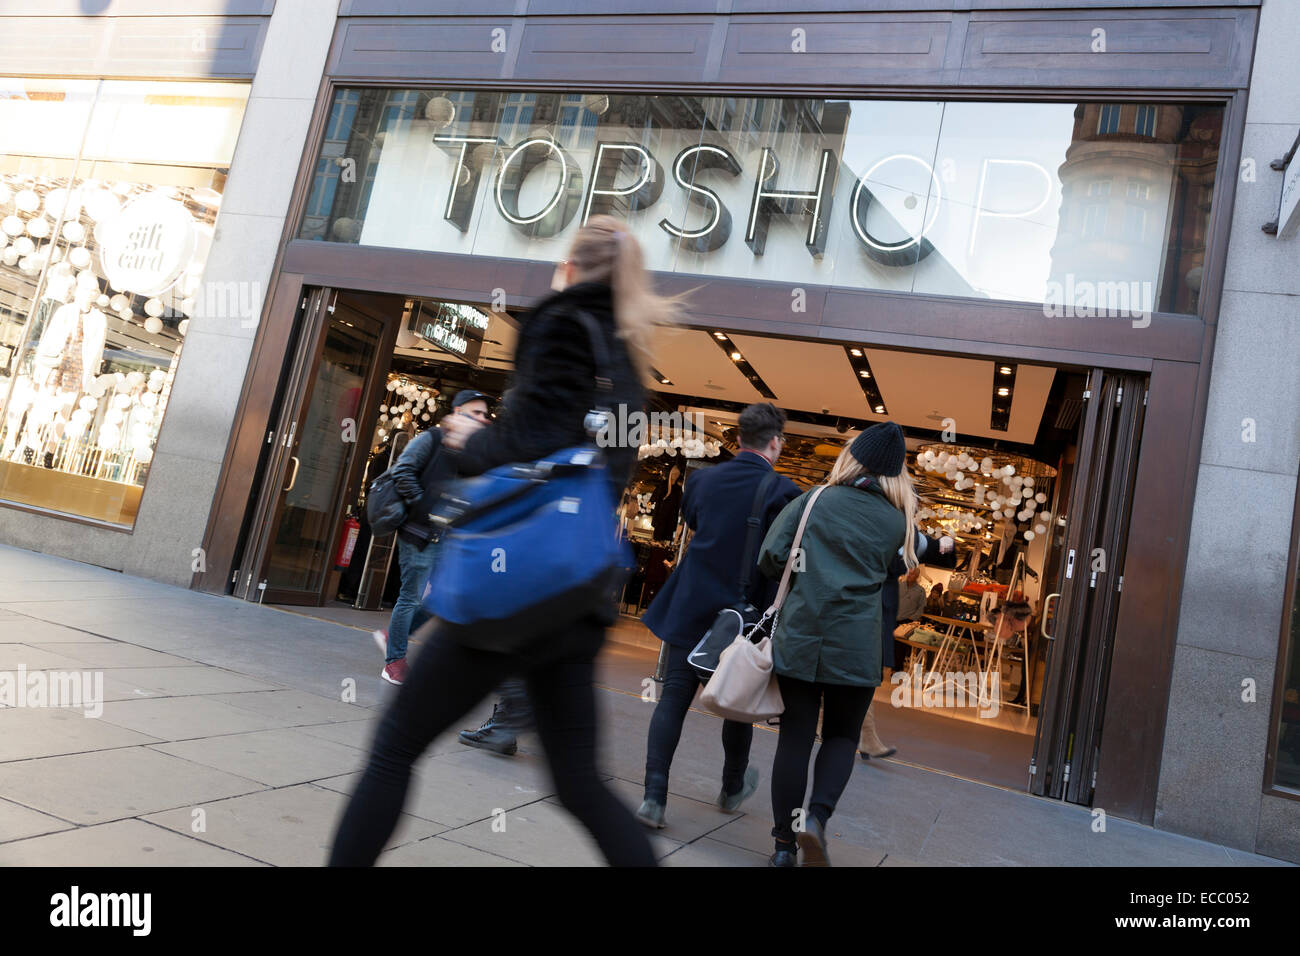 Top Shop clothes store on Oxford Street Stock Photo